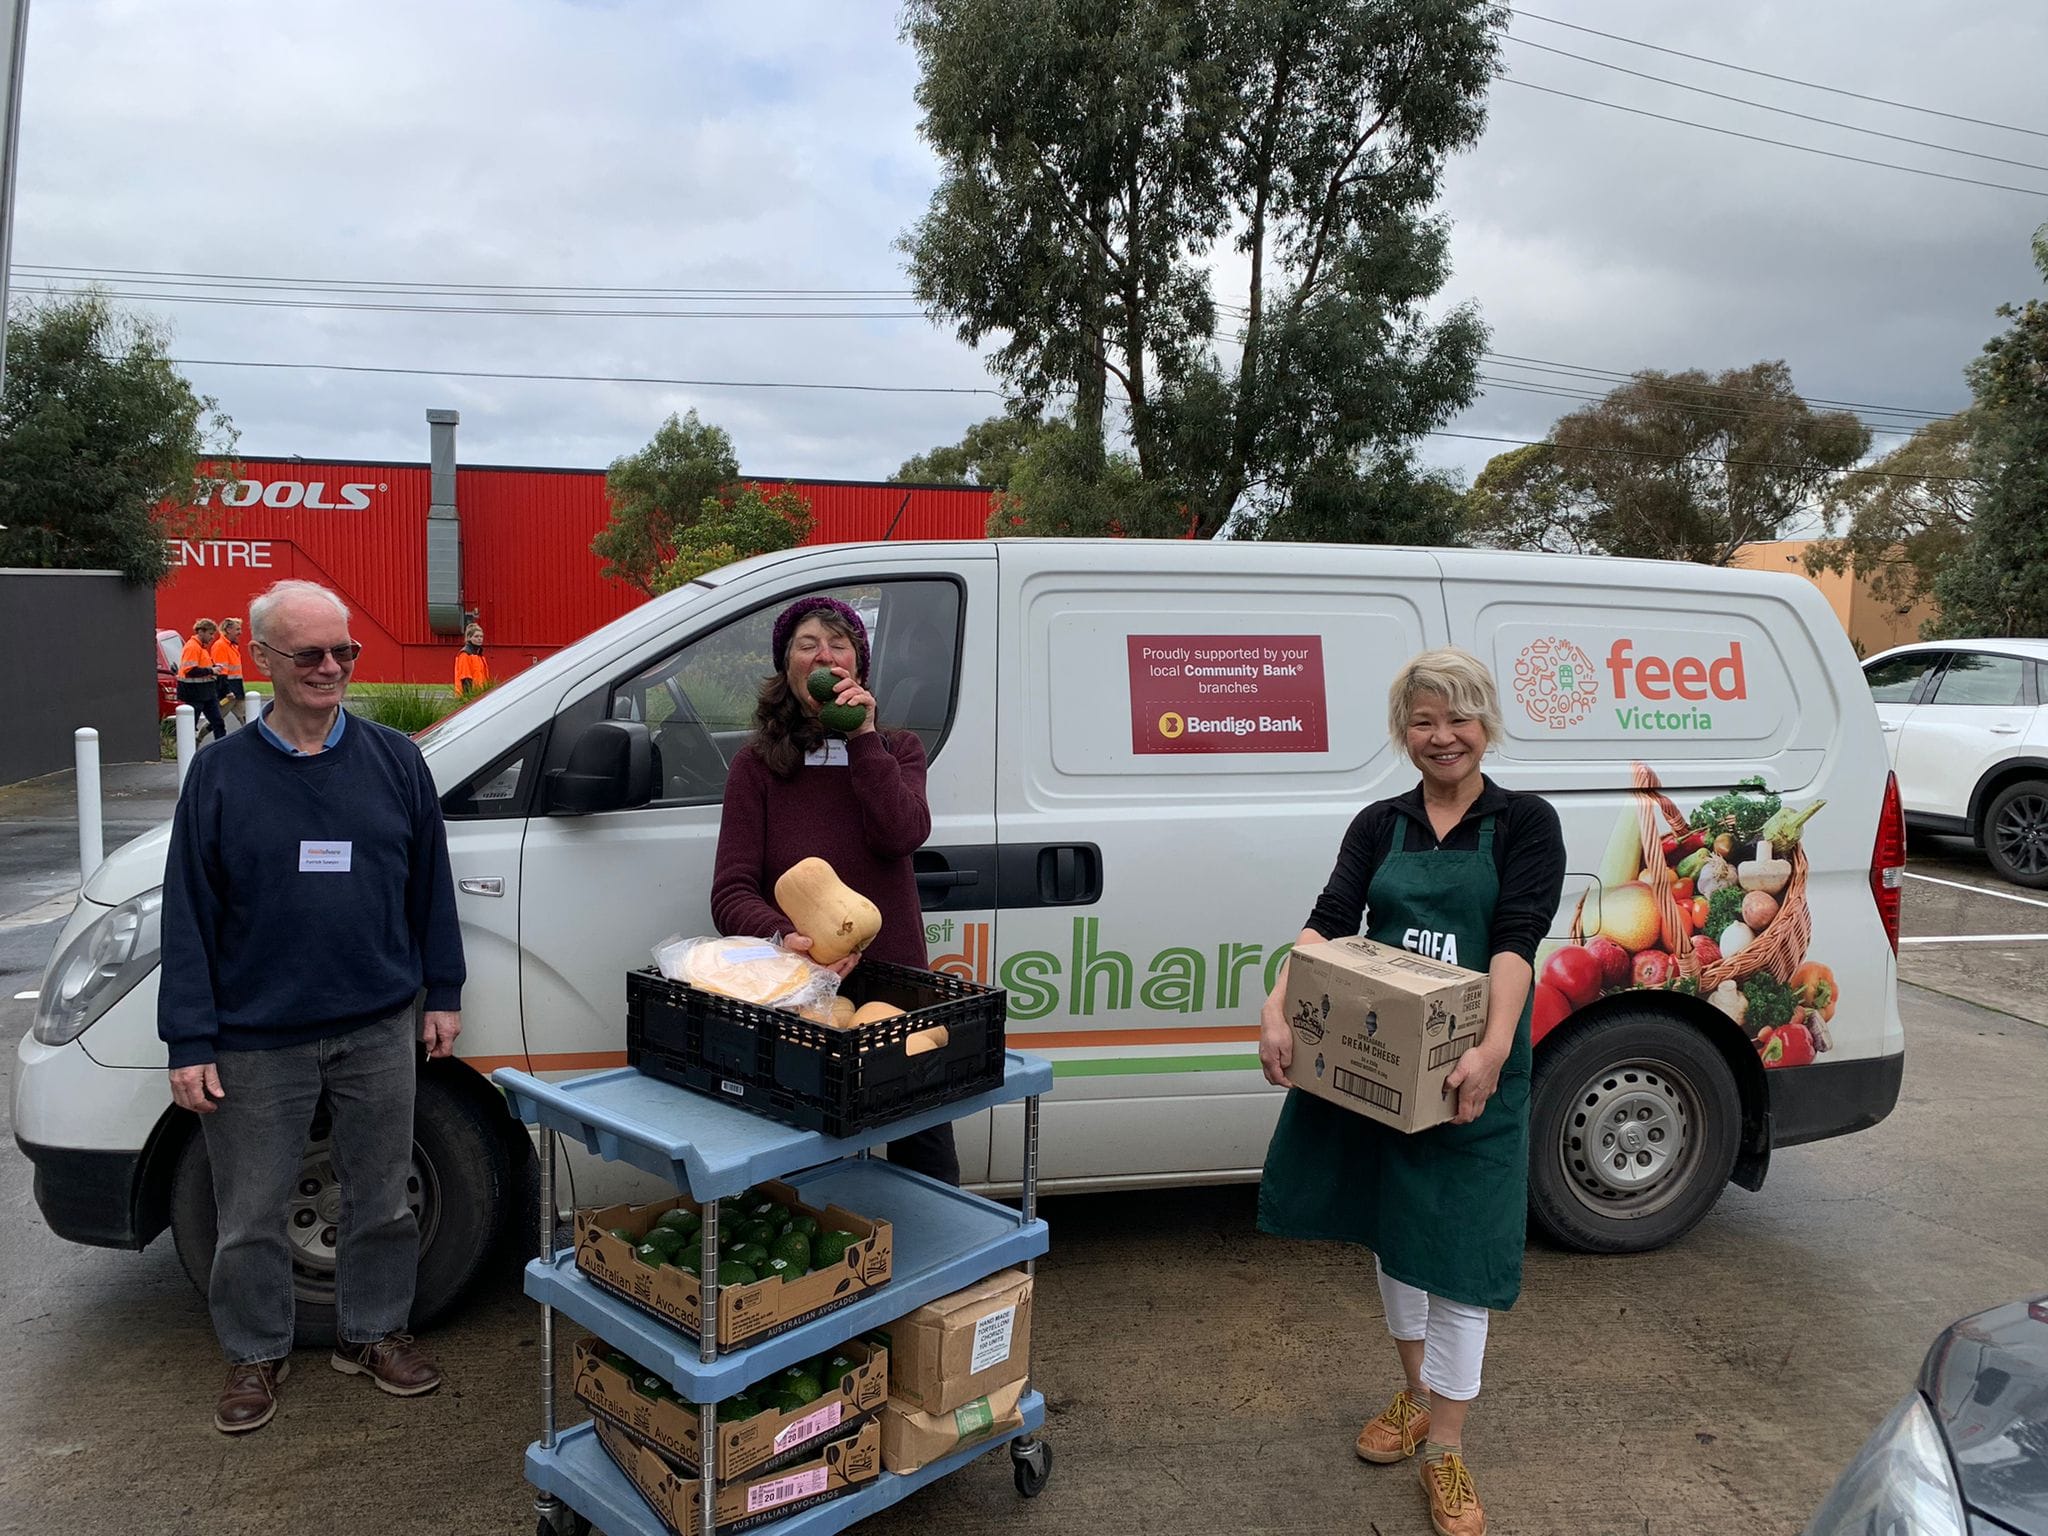 The team at Outer East Food Share deliver food